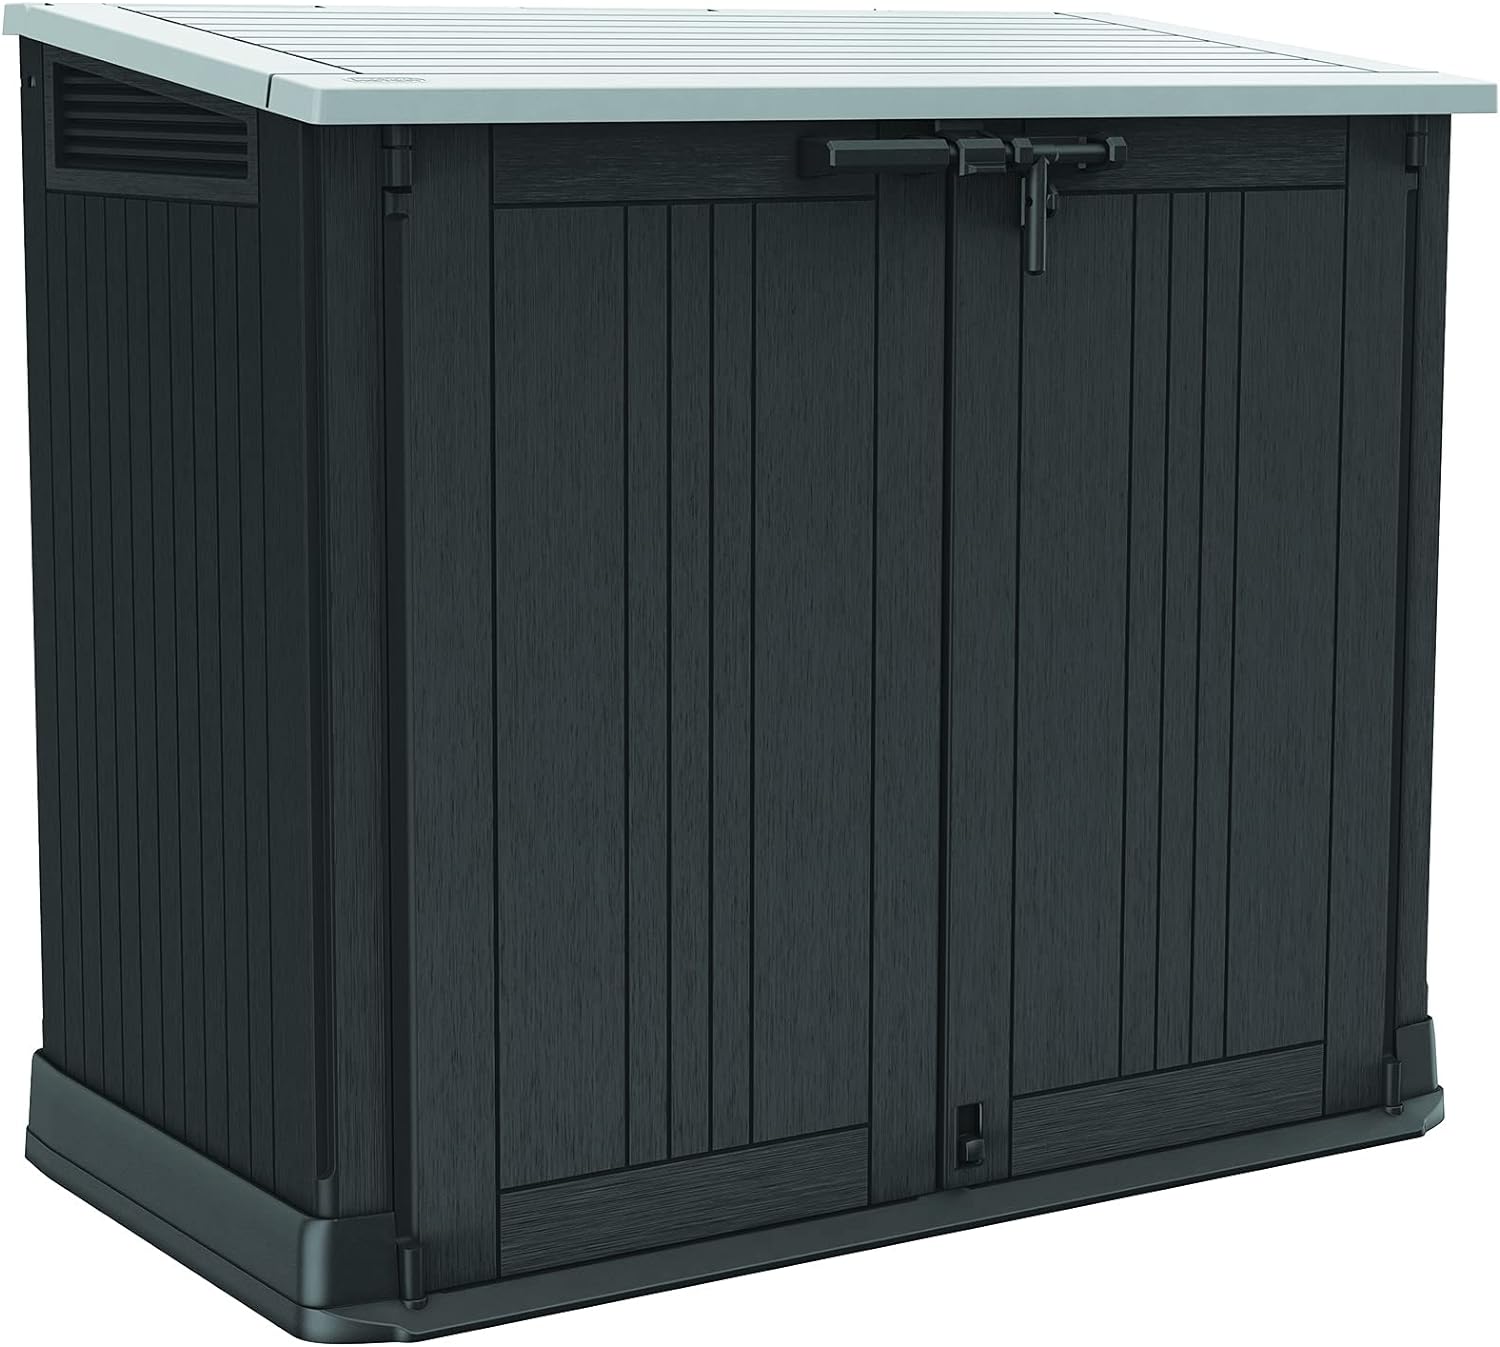 Keter Store-It-Out Prime 4.3 x 3.7 ft. Outdoor Resin Storage Shed with Easy Lift Hinges, Perfect for Yard Tools, Pool Floats and Garden Accessories, Black